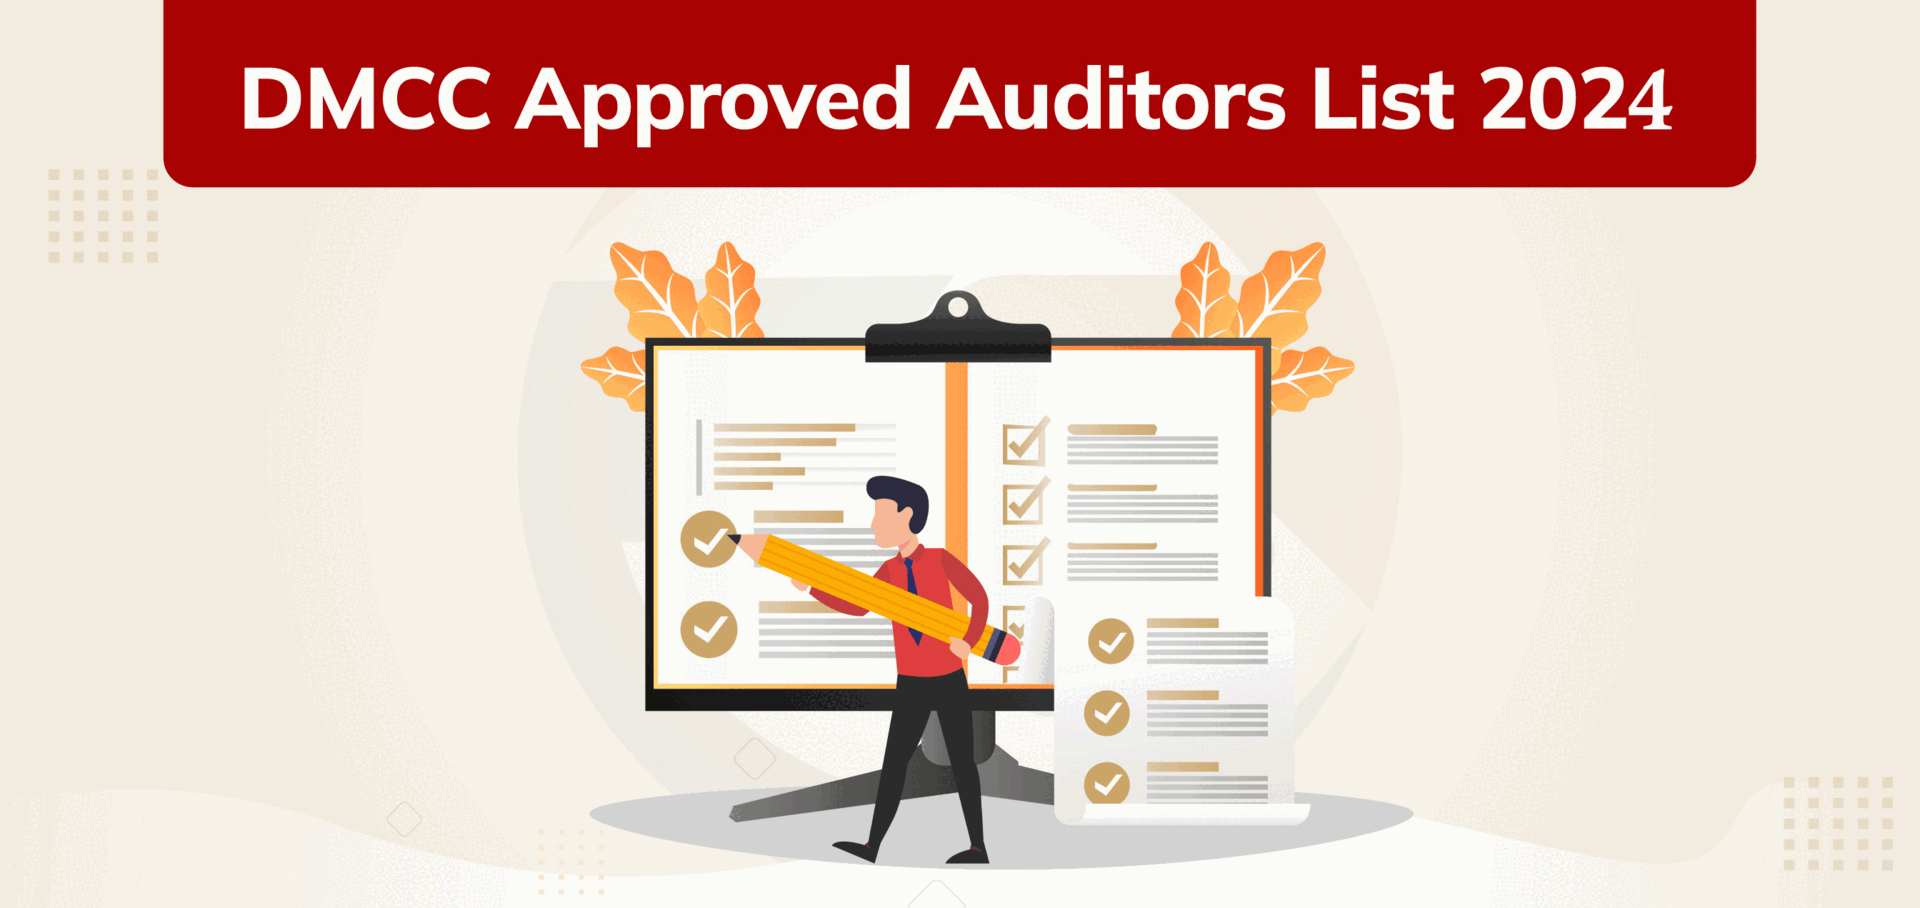 DMCC Approved Auditors List 2024